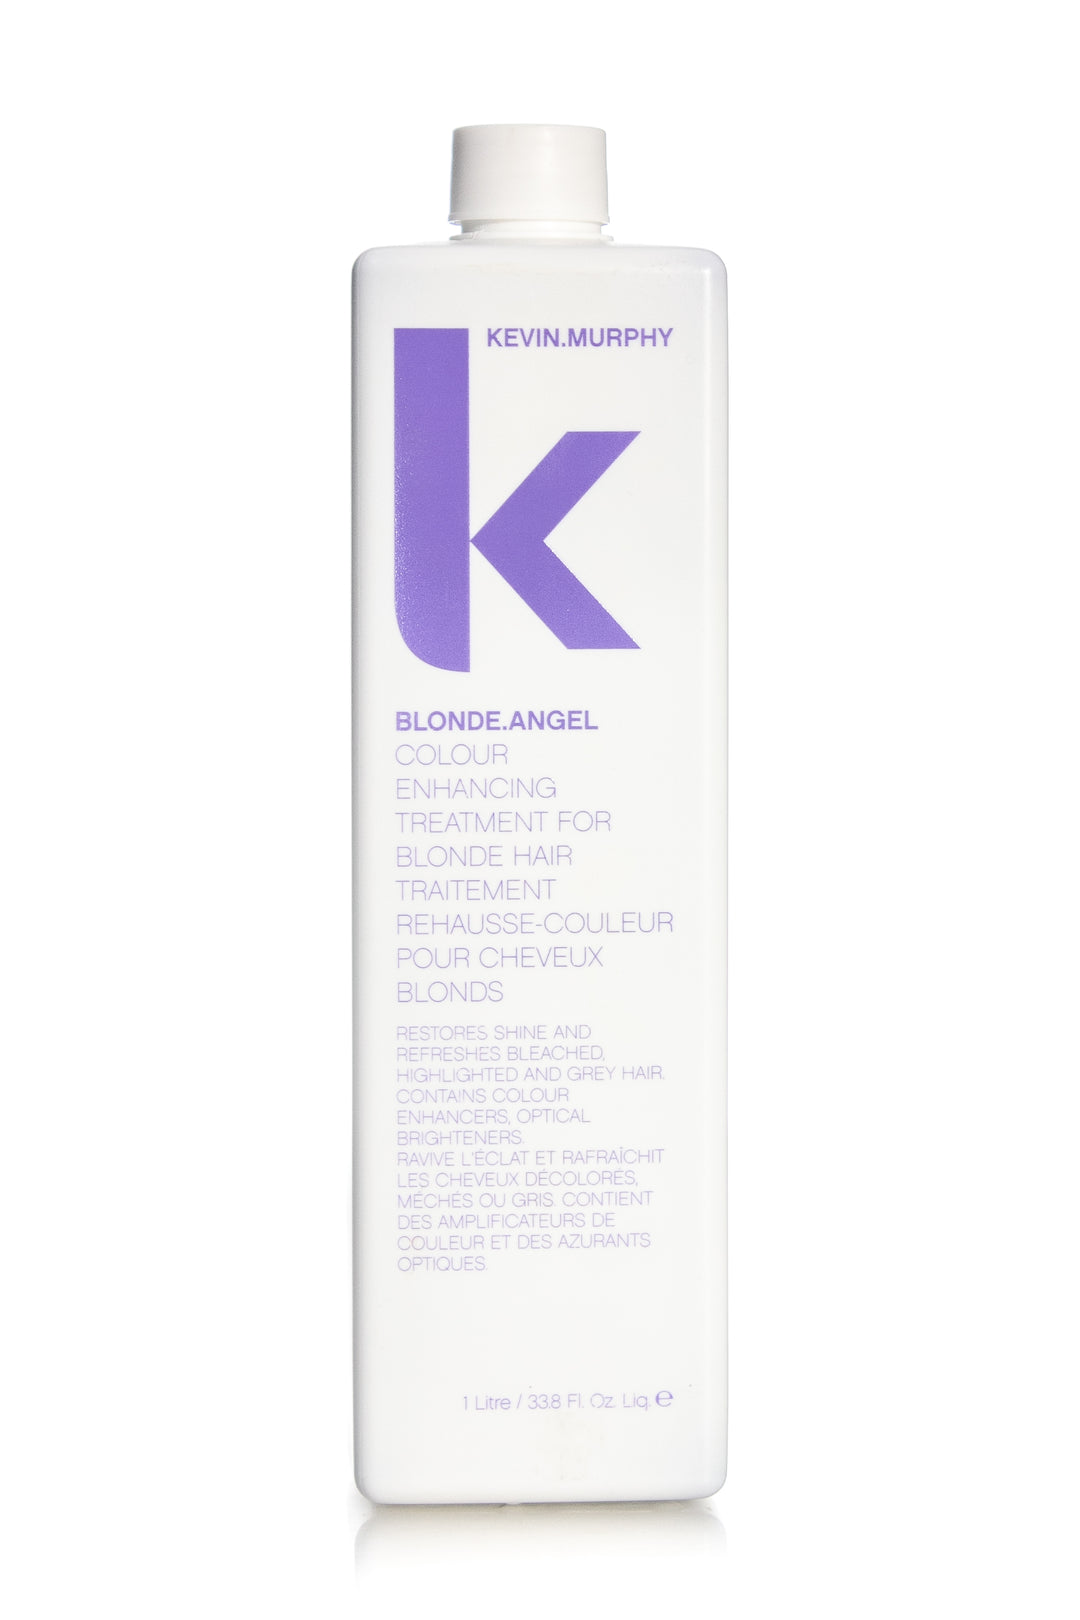 KEVIN MURPHY Blonde Angel Treatment | Various Sizes